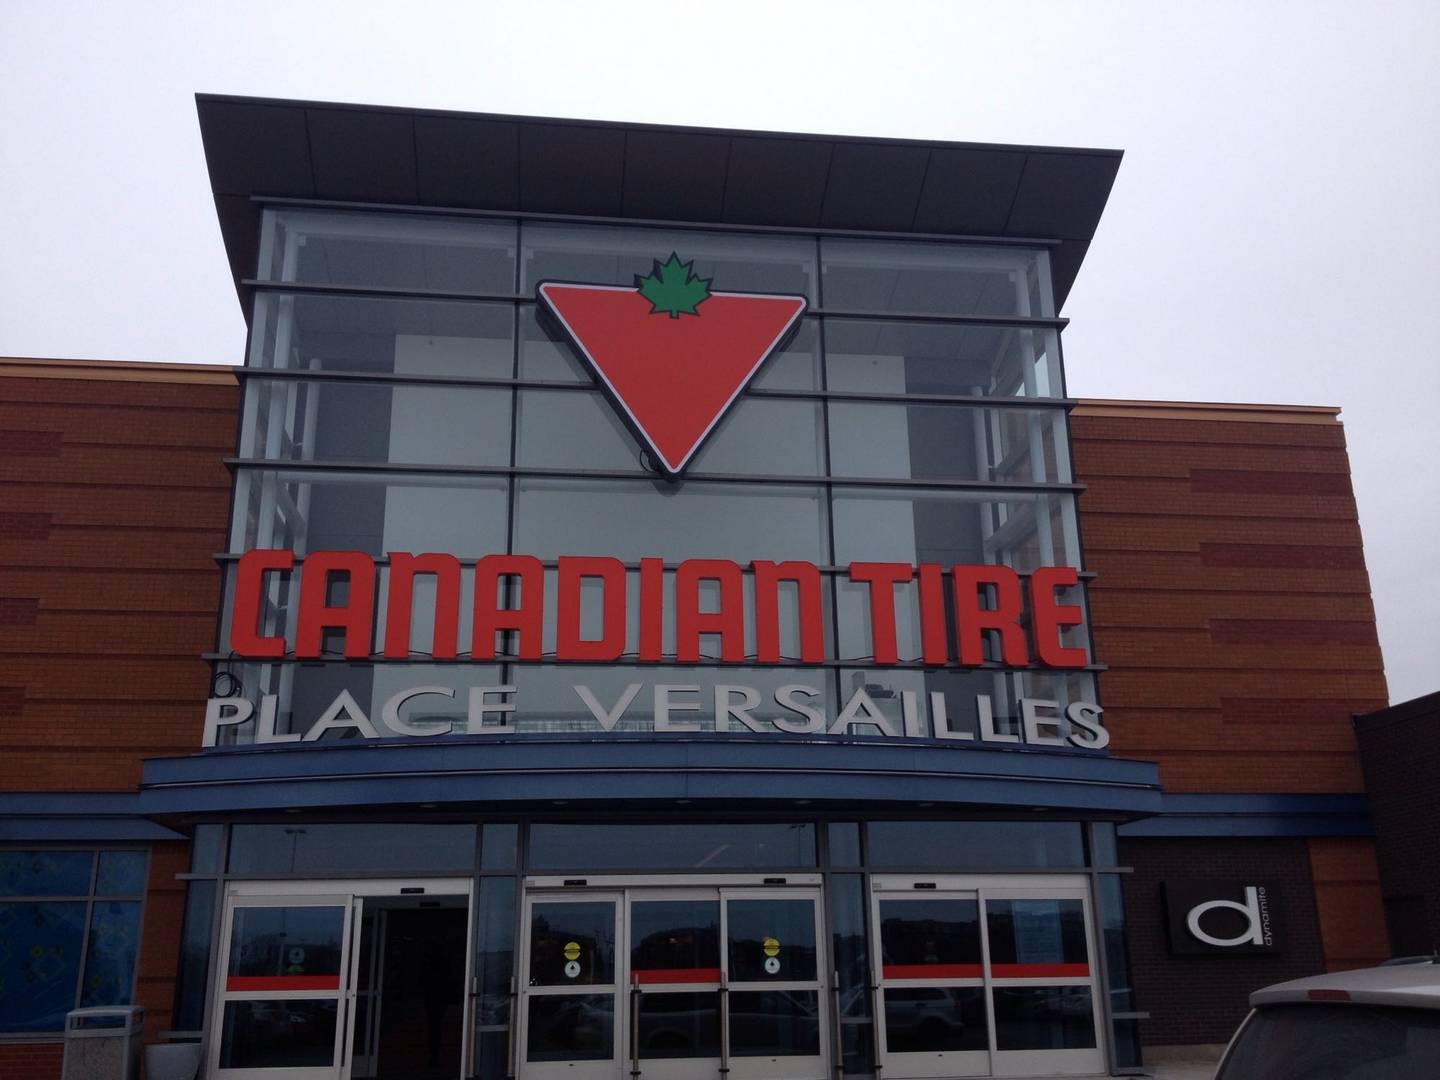 Construction commerciale Canadian Tire Place Versailles Phase I